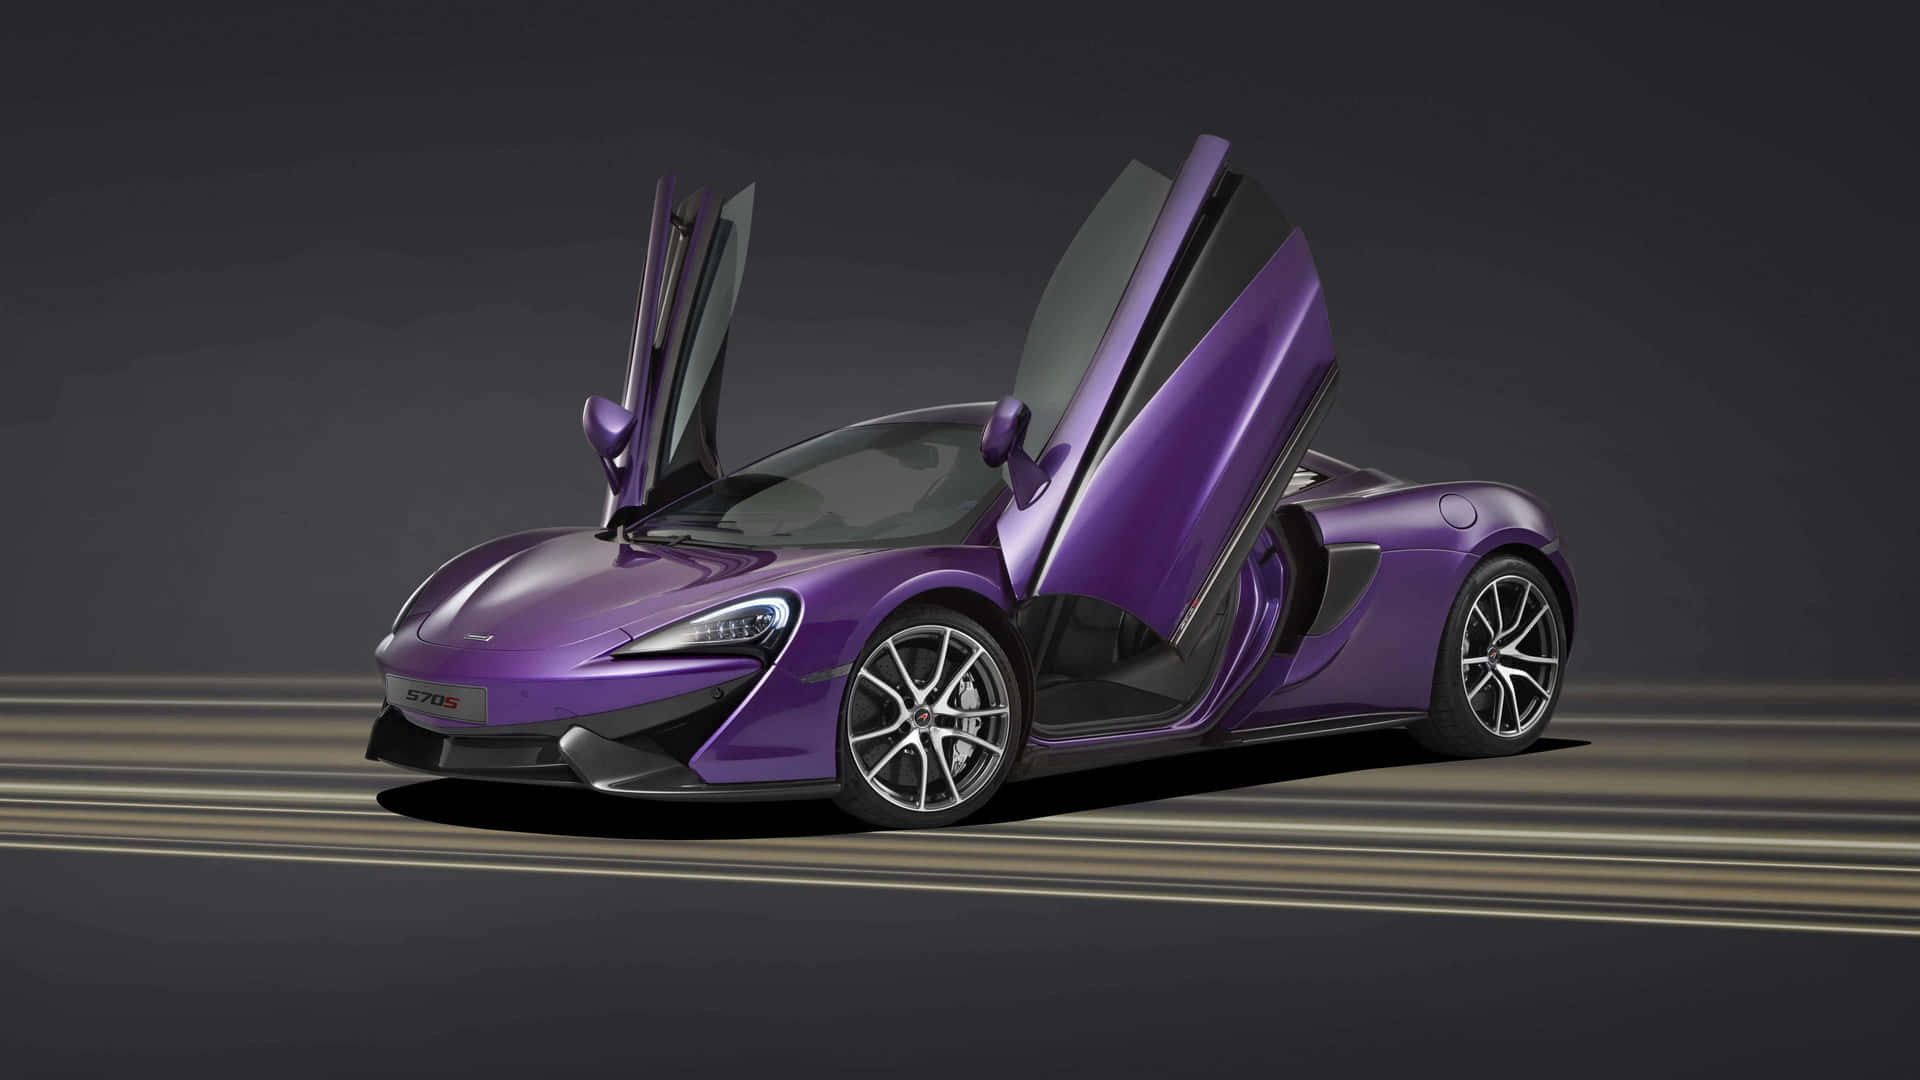 Sleek and sophisticated, this Cool Mclaren is a car of class. Wallpaper